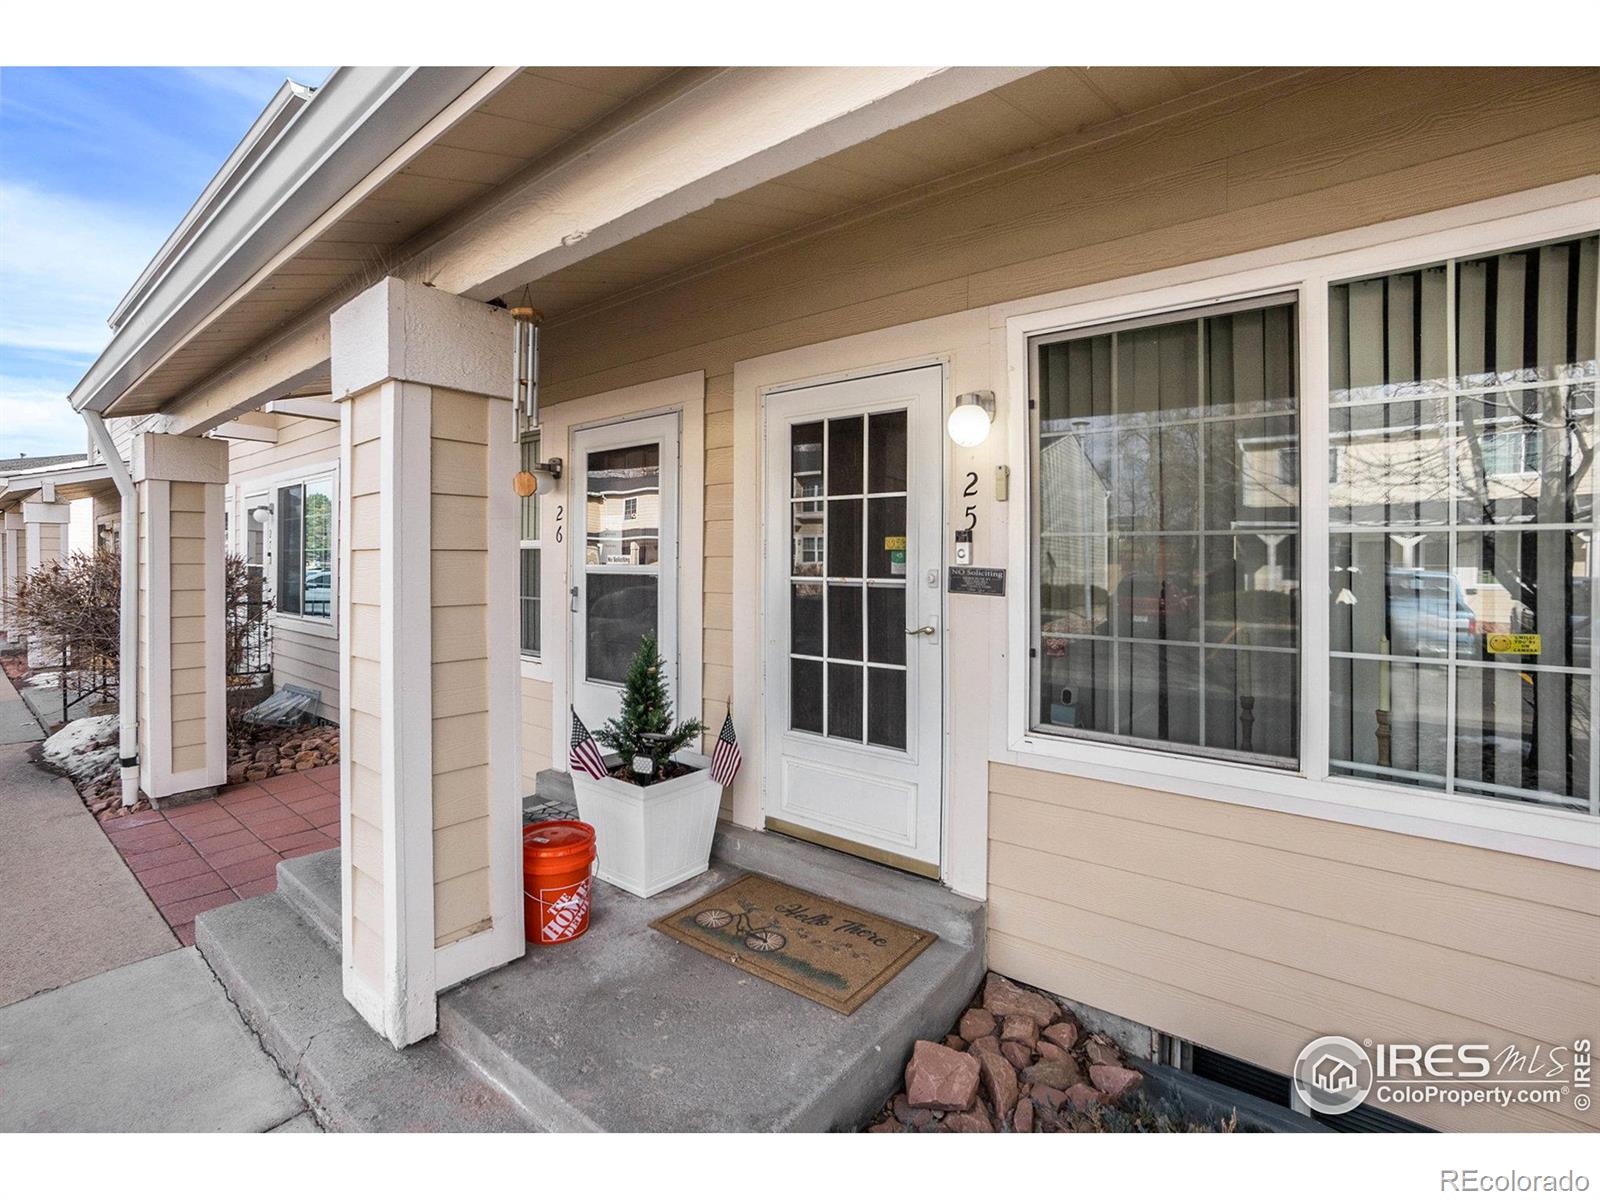 Report Image for 8979  Field Street,Westminster, Colorado